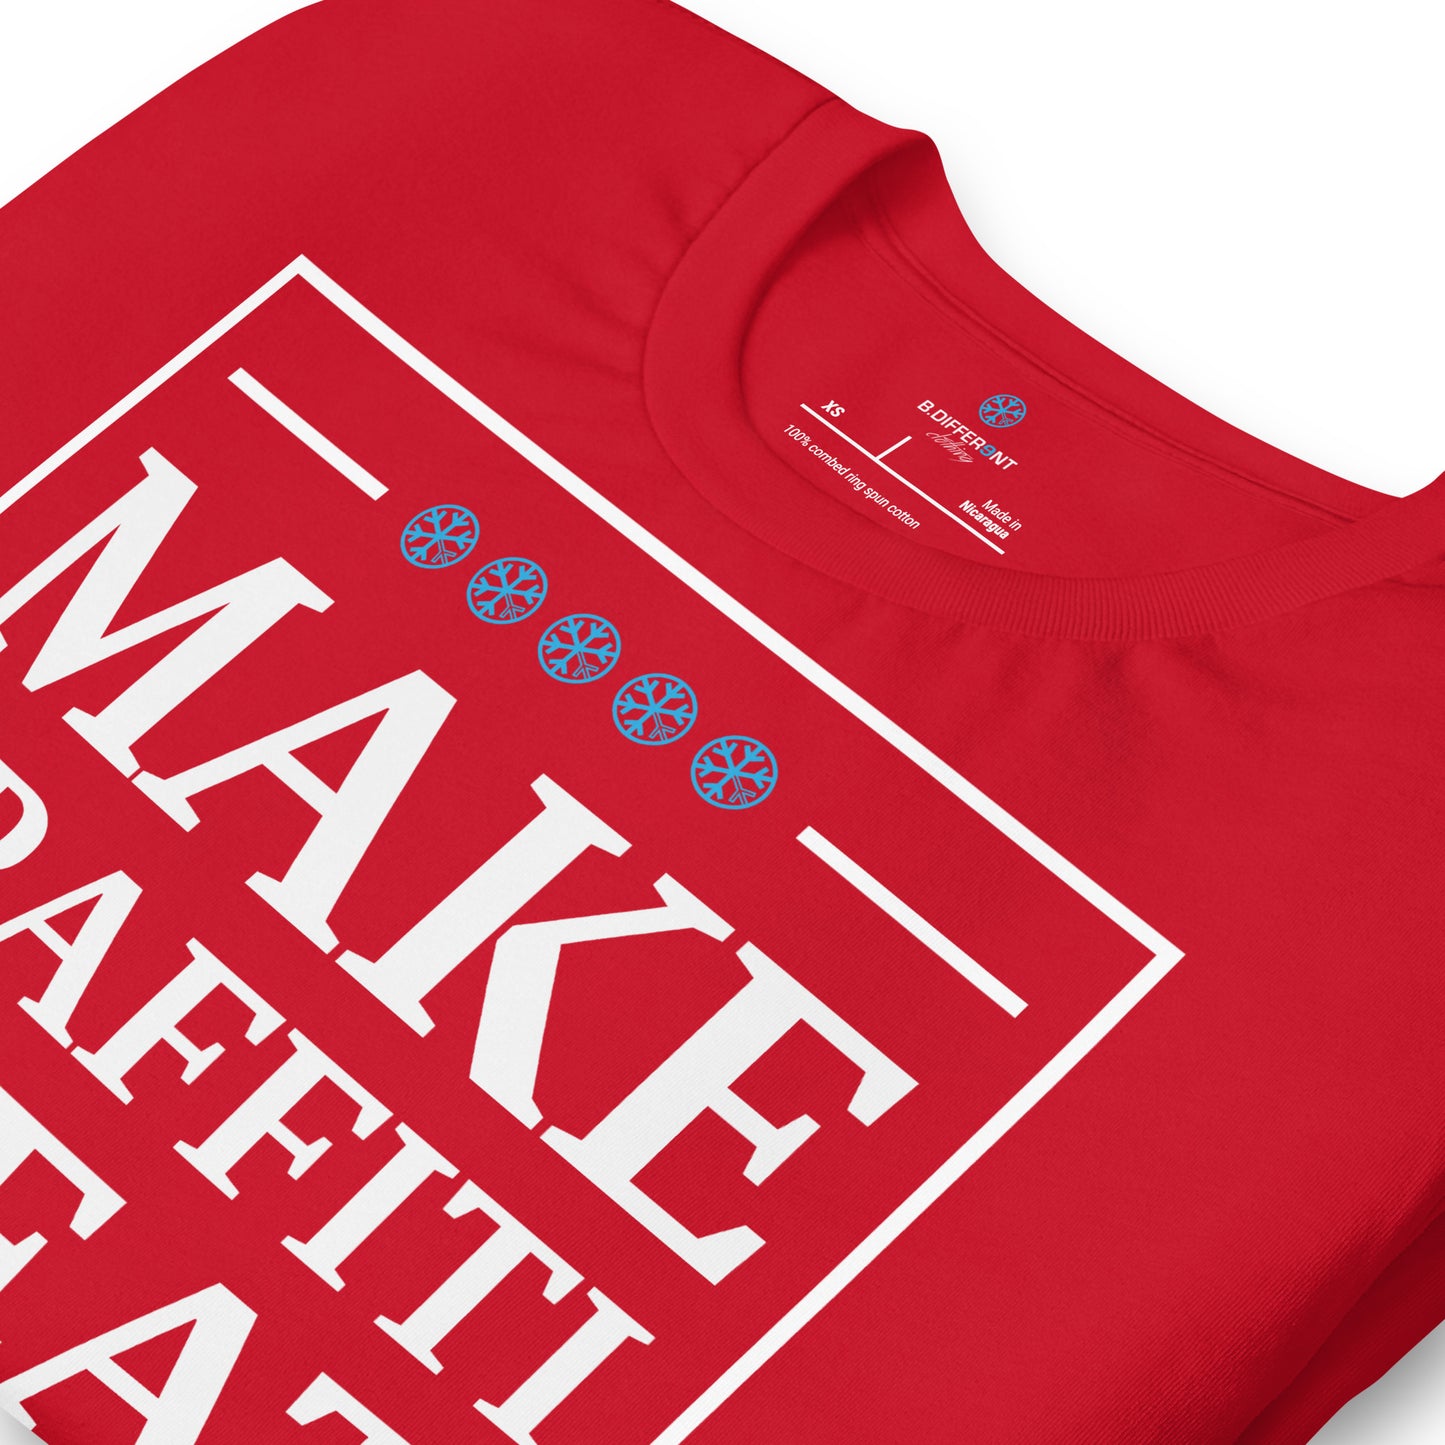 detail of make graffiti great again tee red by b.different clothing graffiti and street art inspired streetwear brand for weirdos, misfits, and outcasts.